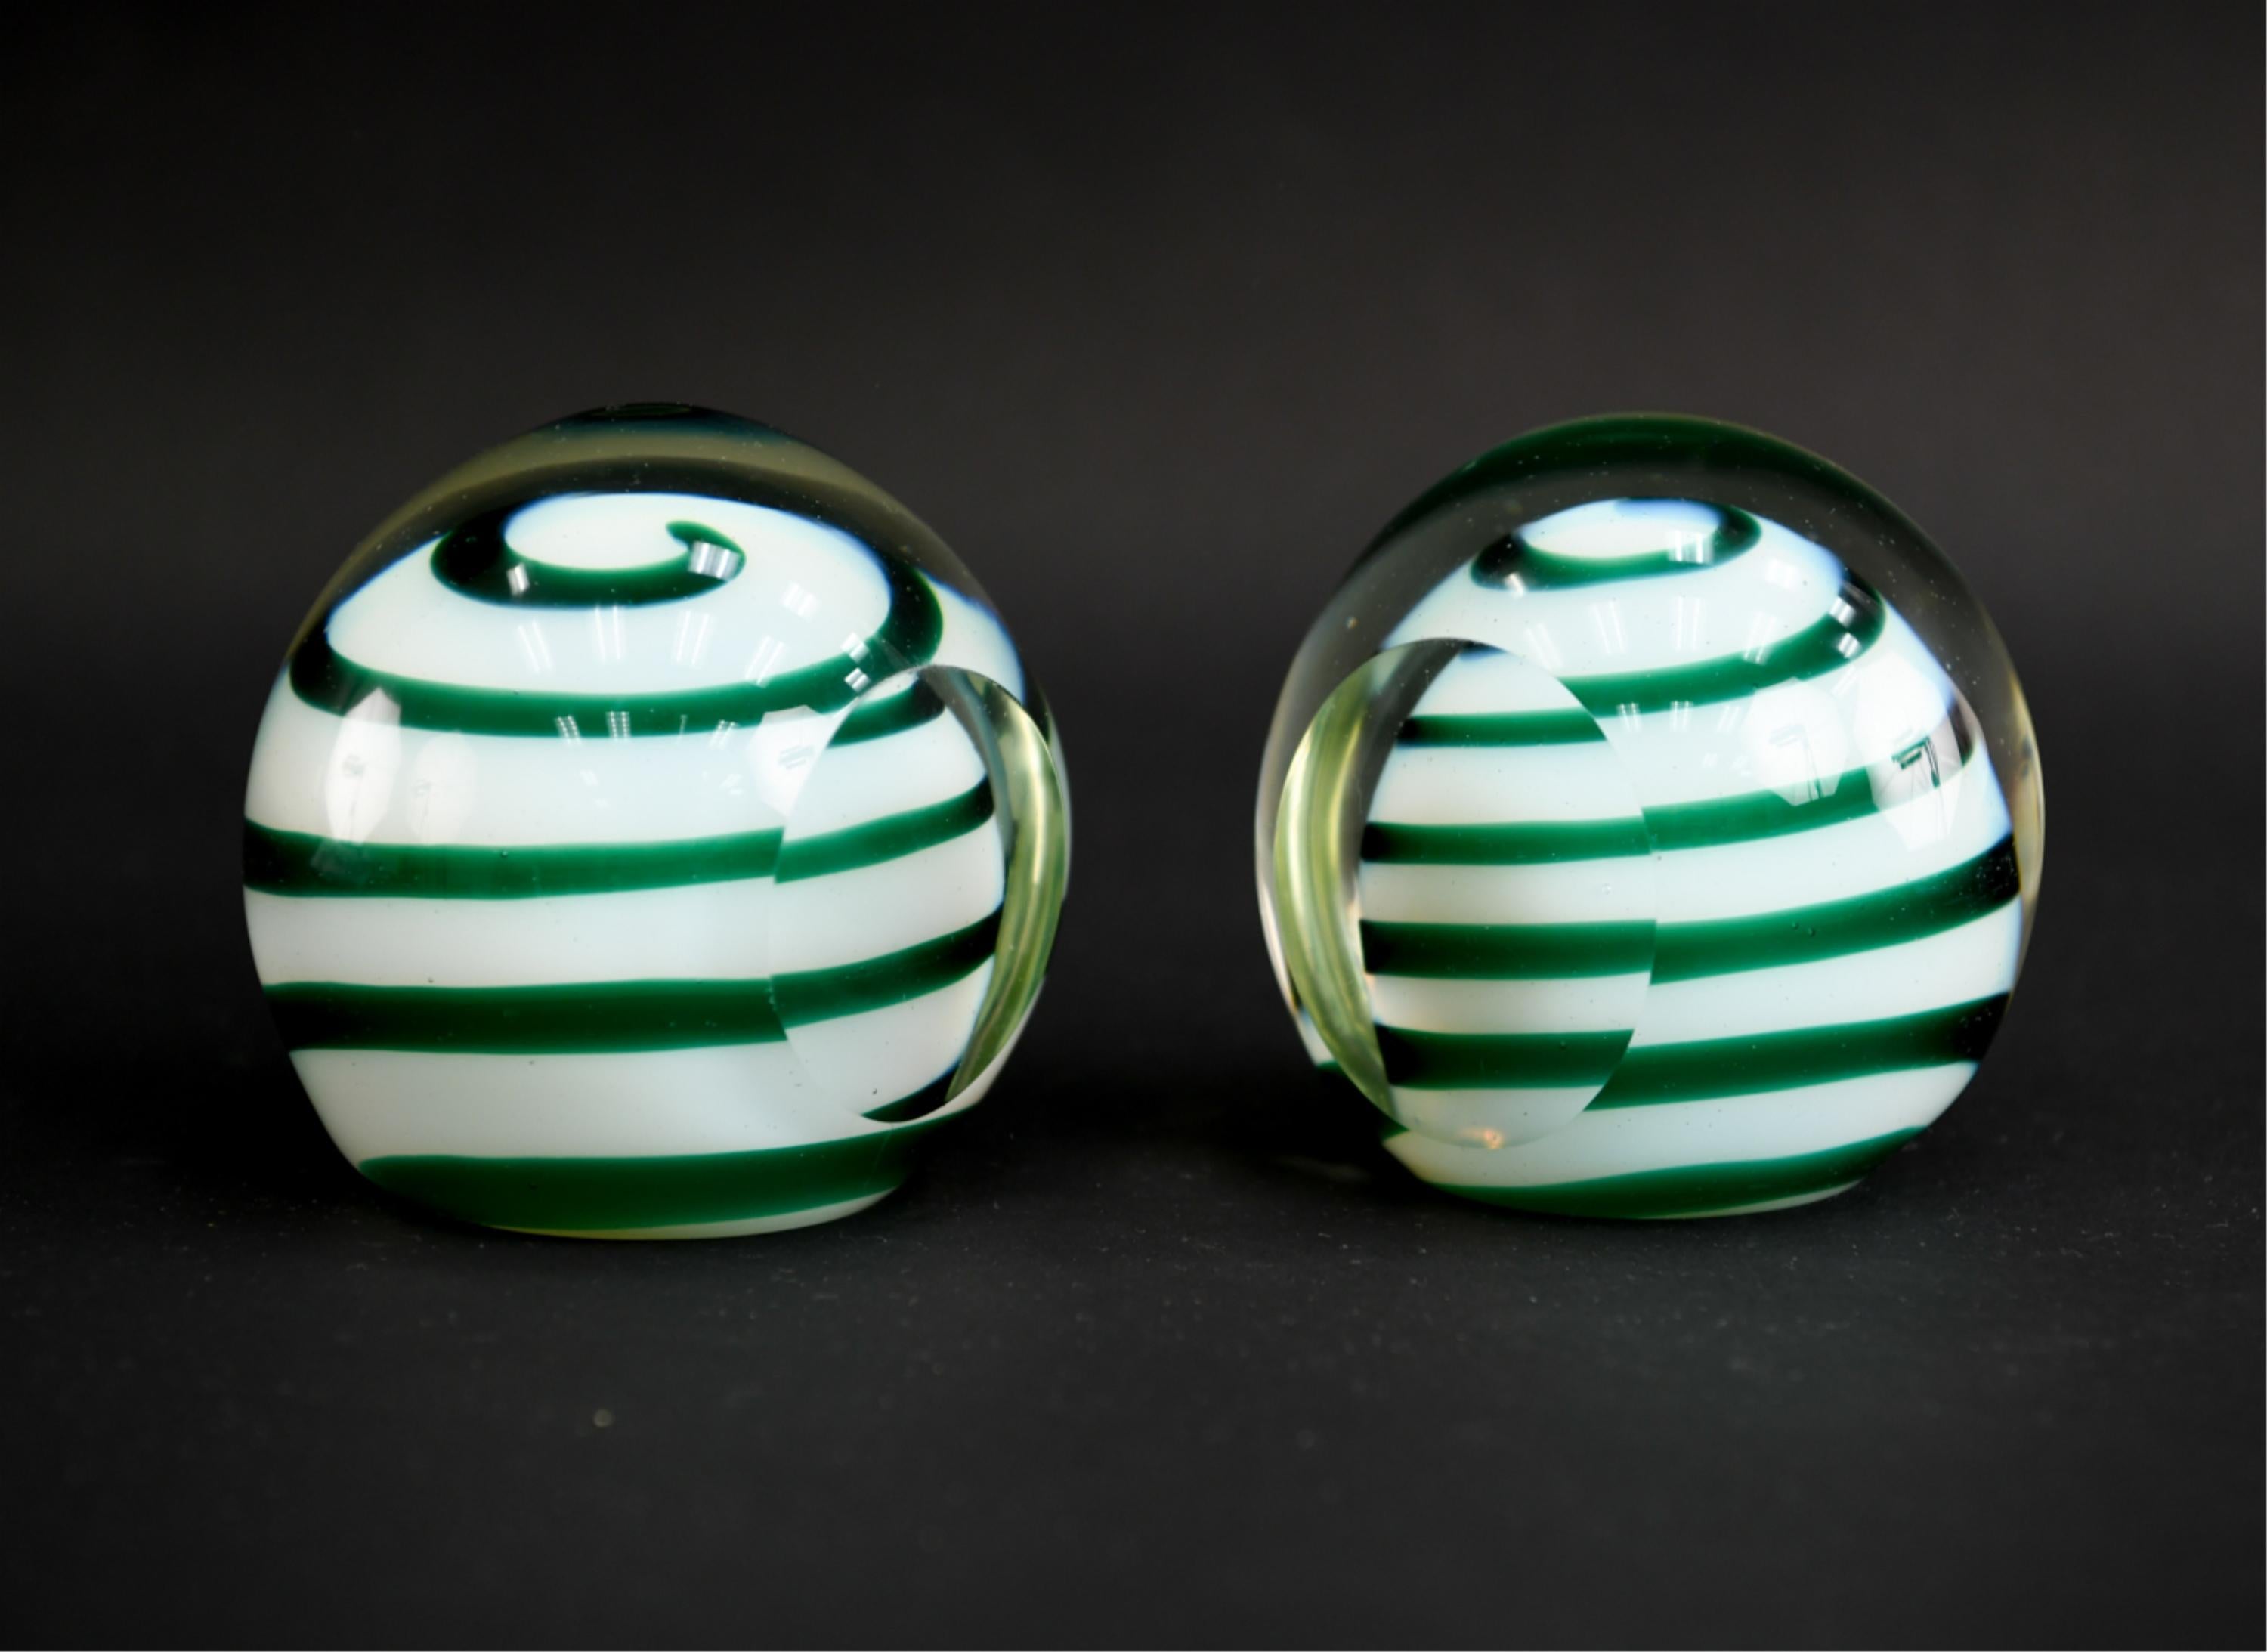 A fun pair of midcentury Italian swirled art glass bookends in green and white.